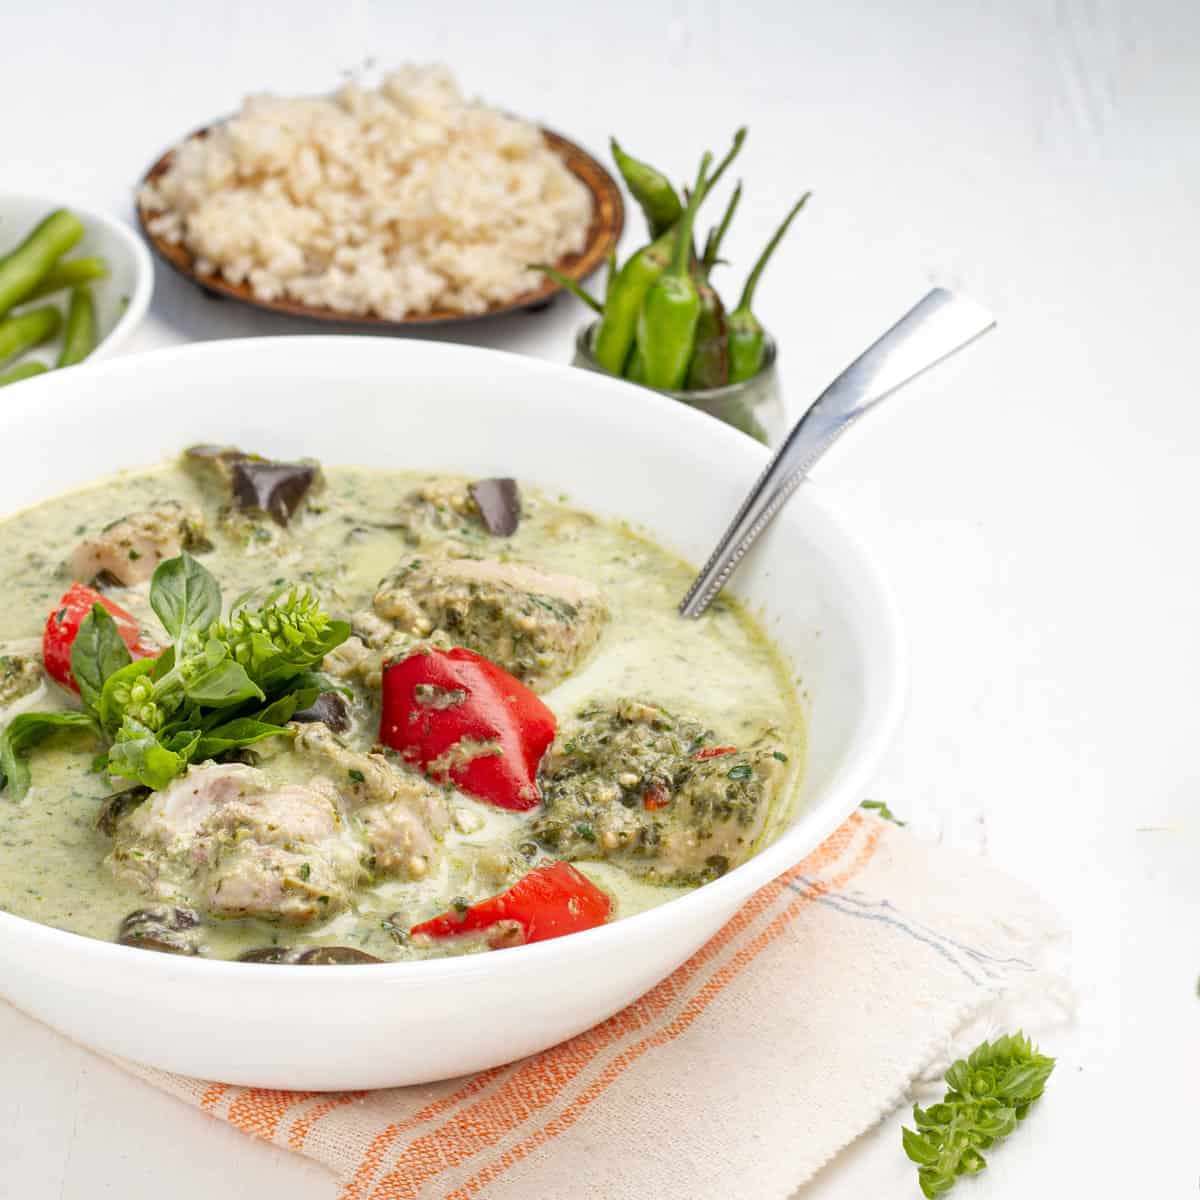 Thai Green Curry Chicken served with rice